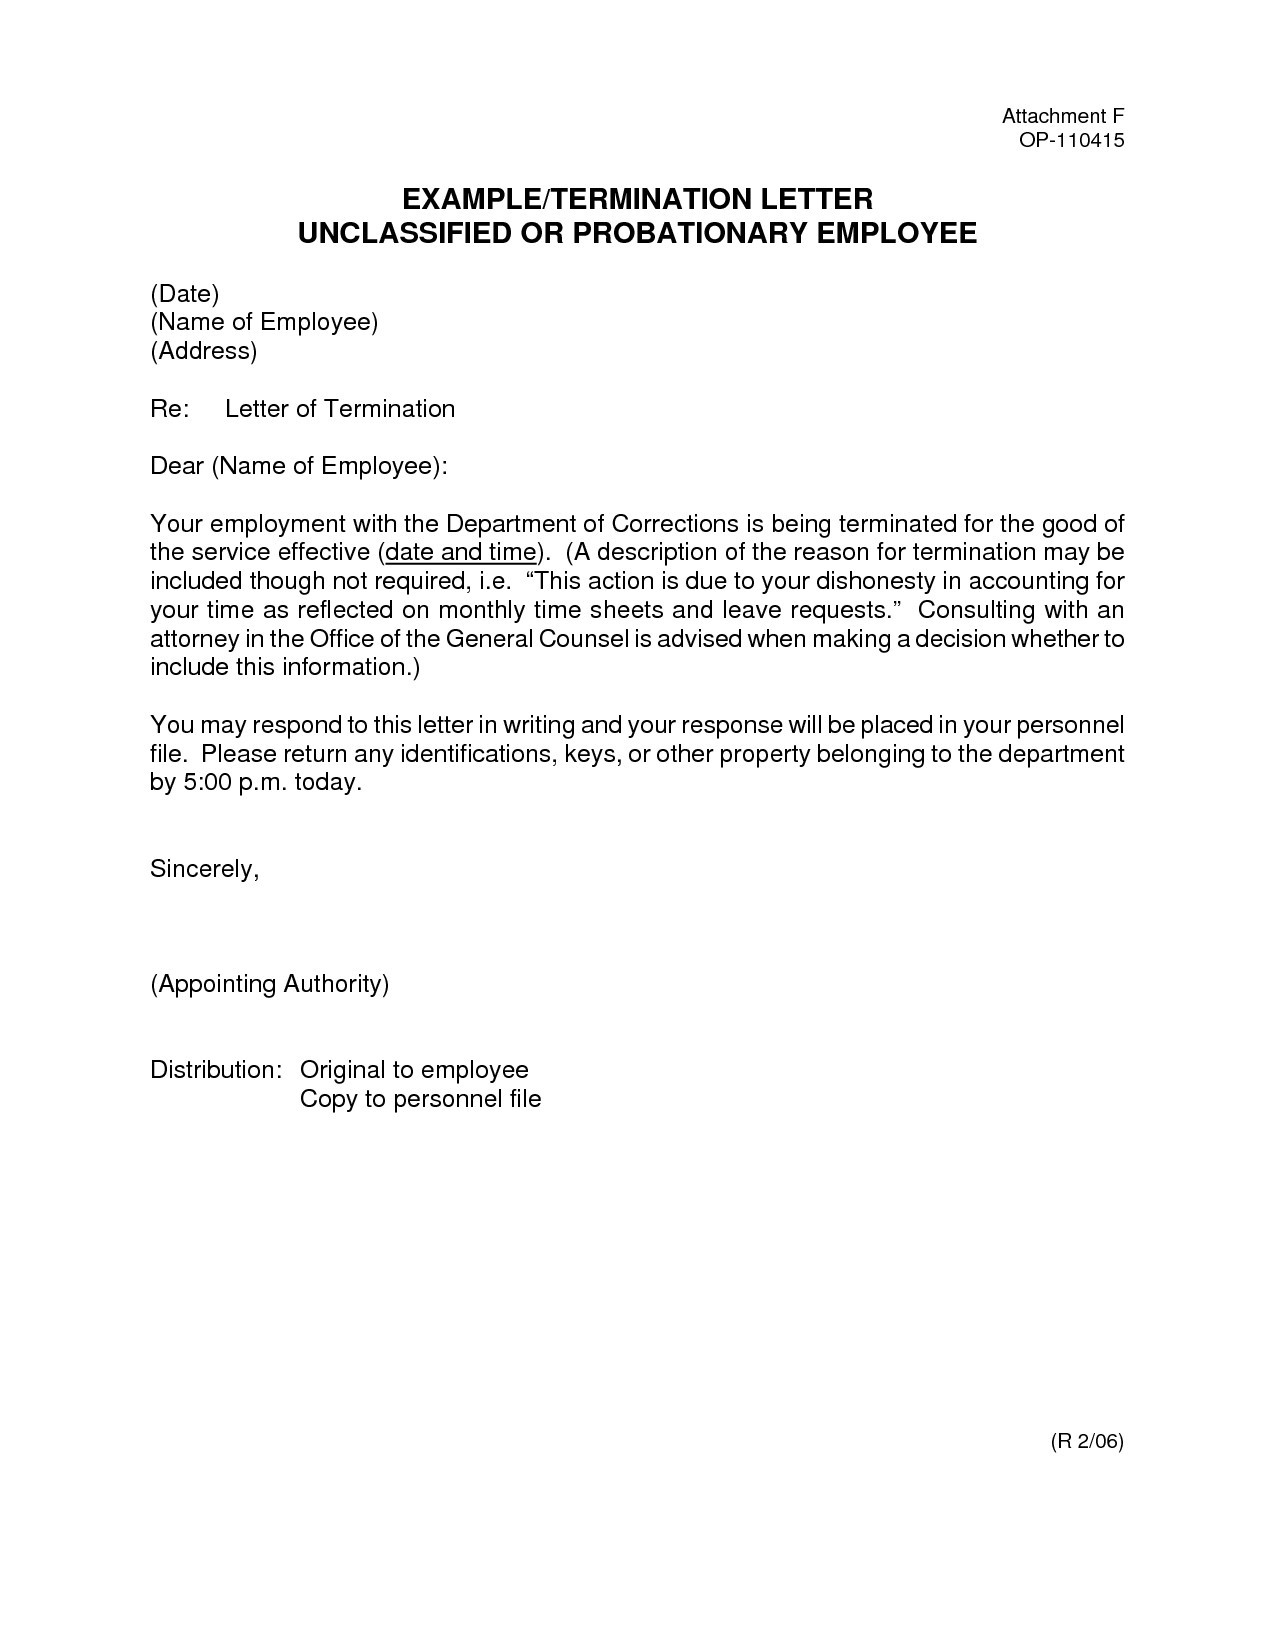 probation termination letter template example-Termination Letter format without Notice Period New Valid Termination Letter format with Notice Period 14-n